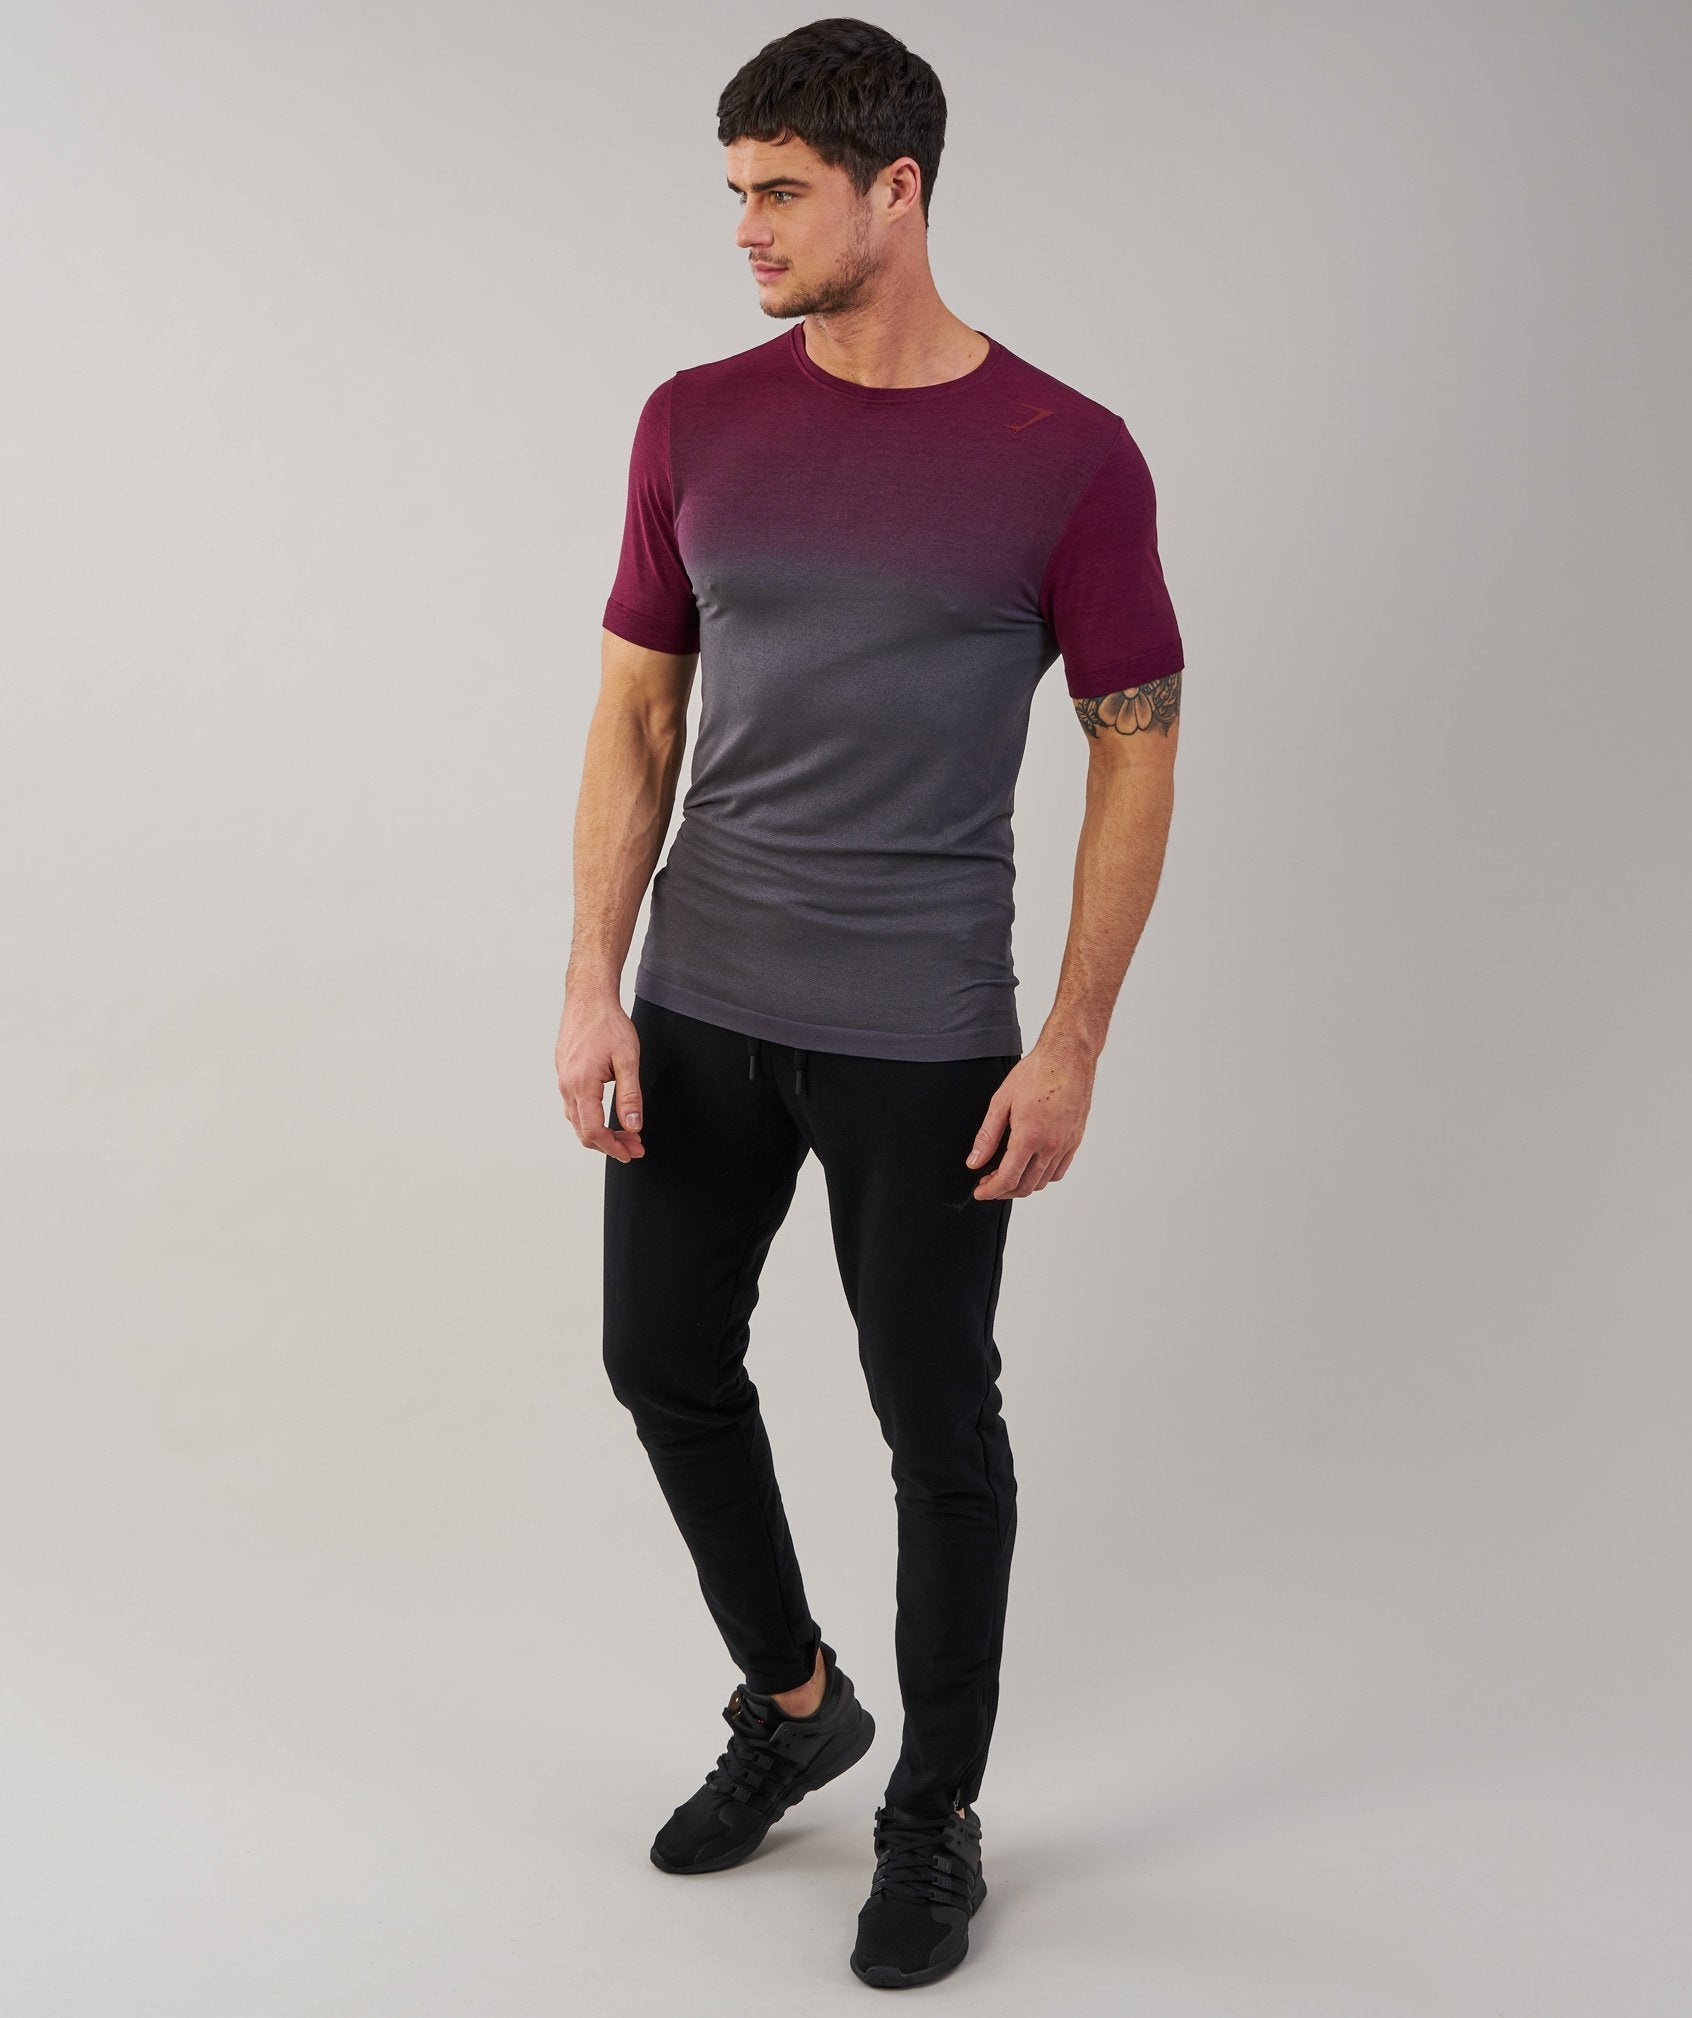 Ombre T-Shirt in Port/Charcoal - view 4